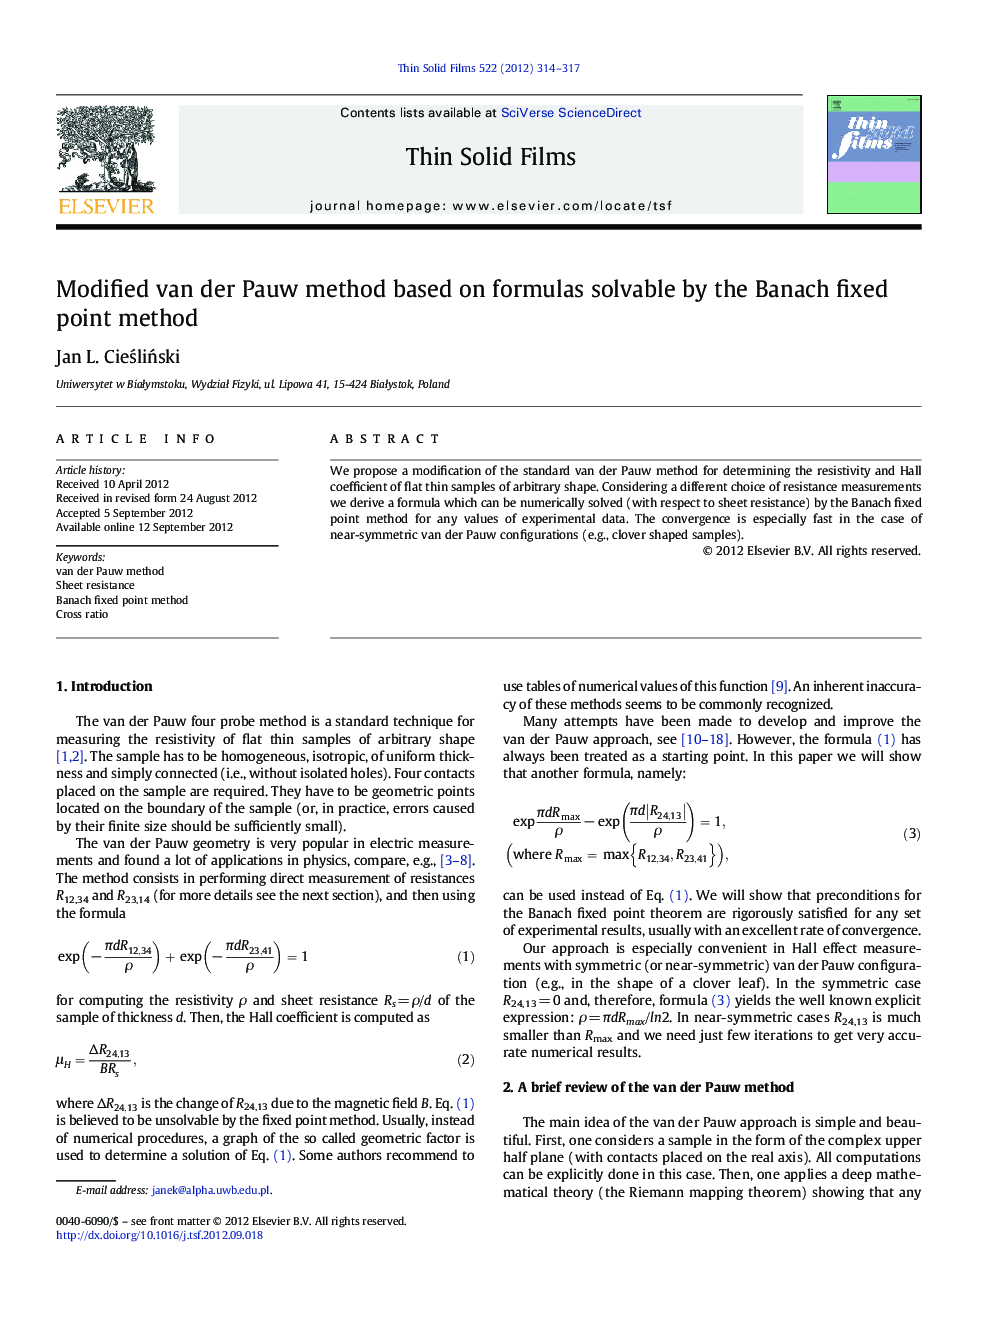 Modified van der Pauw method based on formulas solvable by the Banach fixed point method